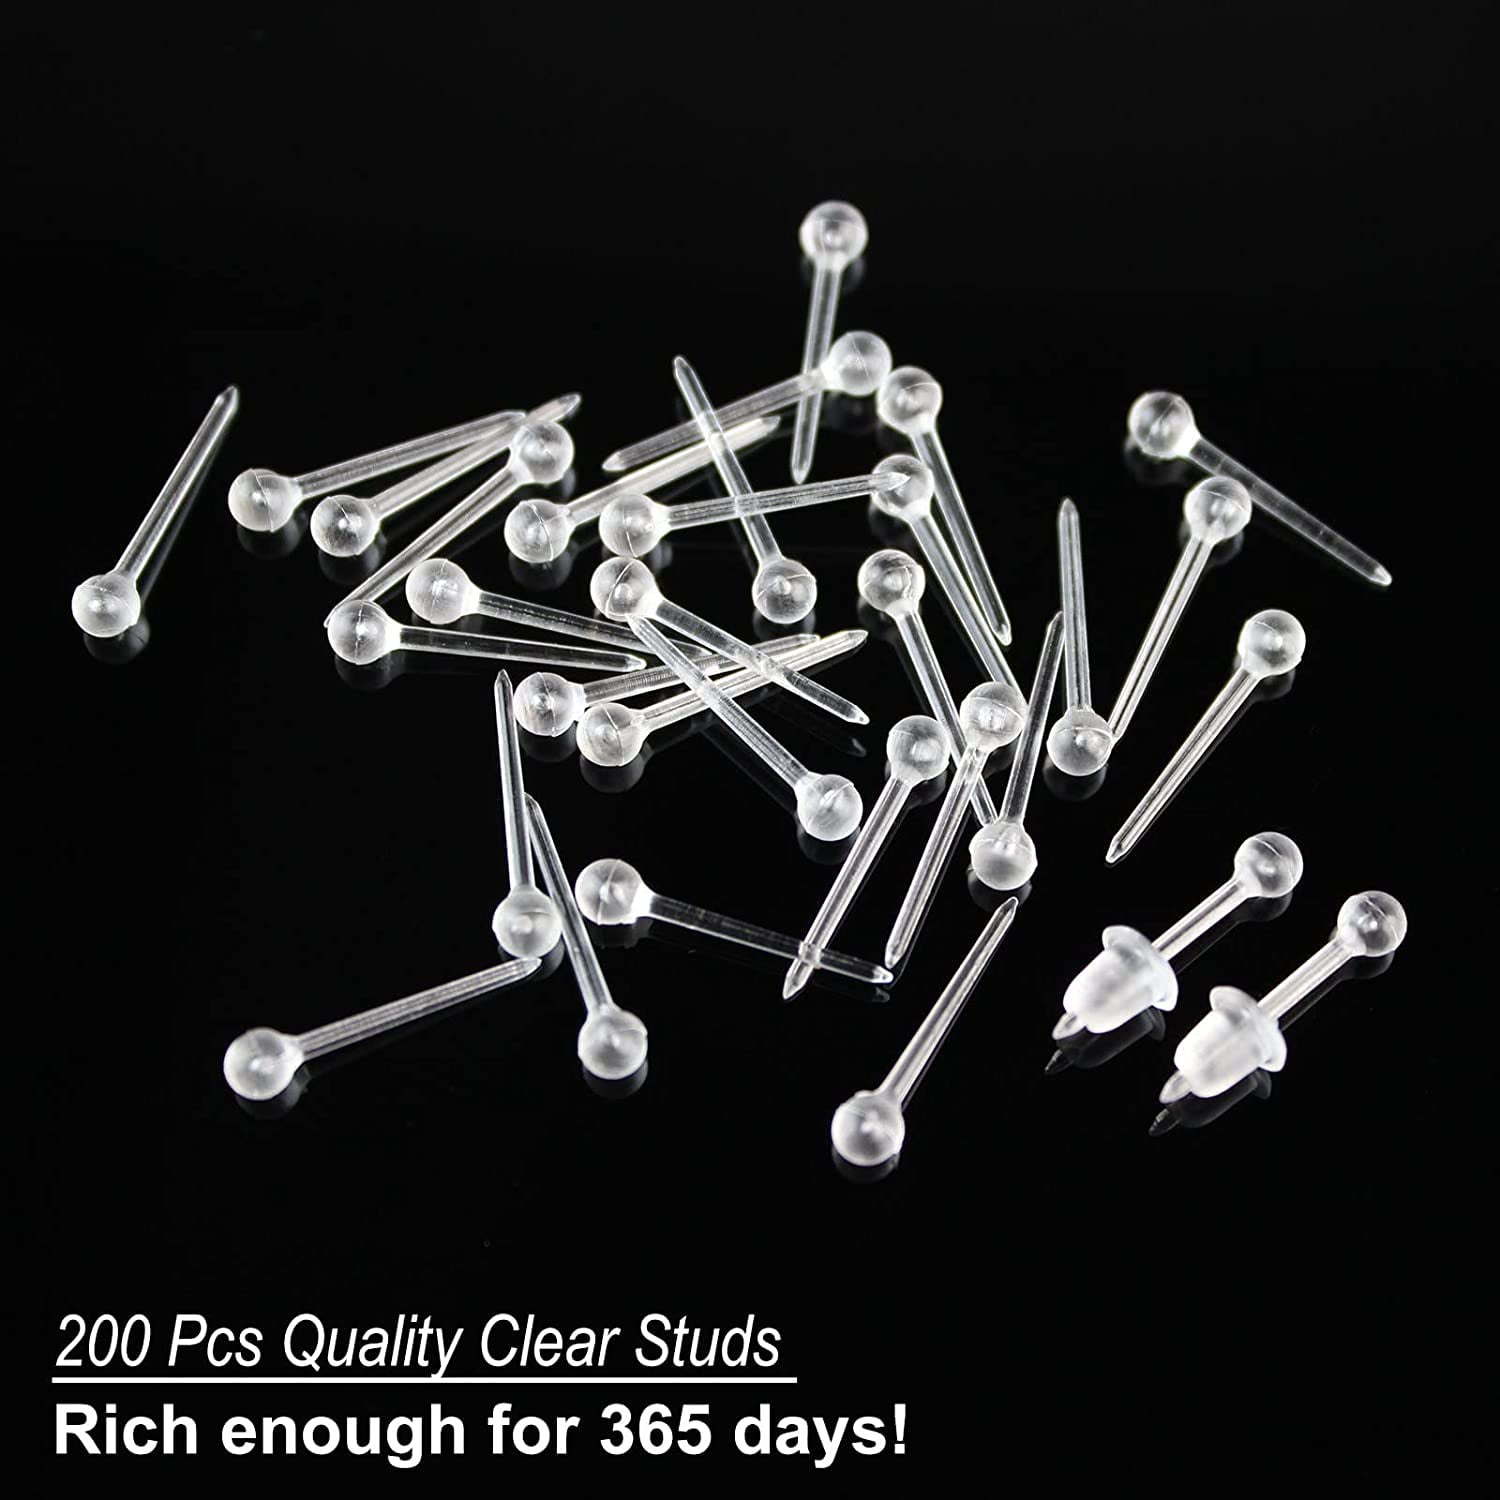  AoedeJ 100 Pcs Clear Earrings for Sports with Plastic Earring  Backs Plastic Earrings for Sensitive Ears Invisible Earrings for Women  Girls (Ball): Clothing, Shoes & Jewelry